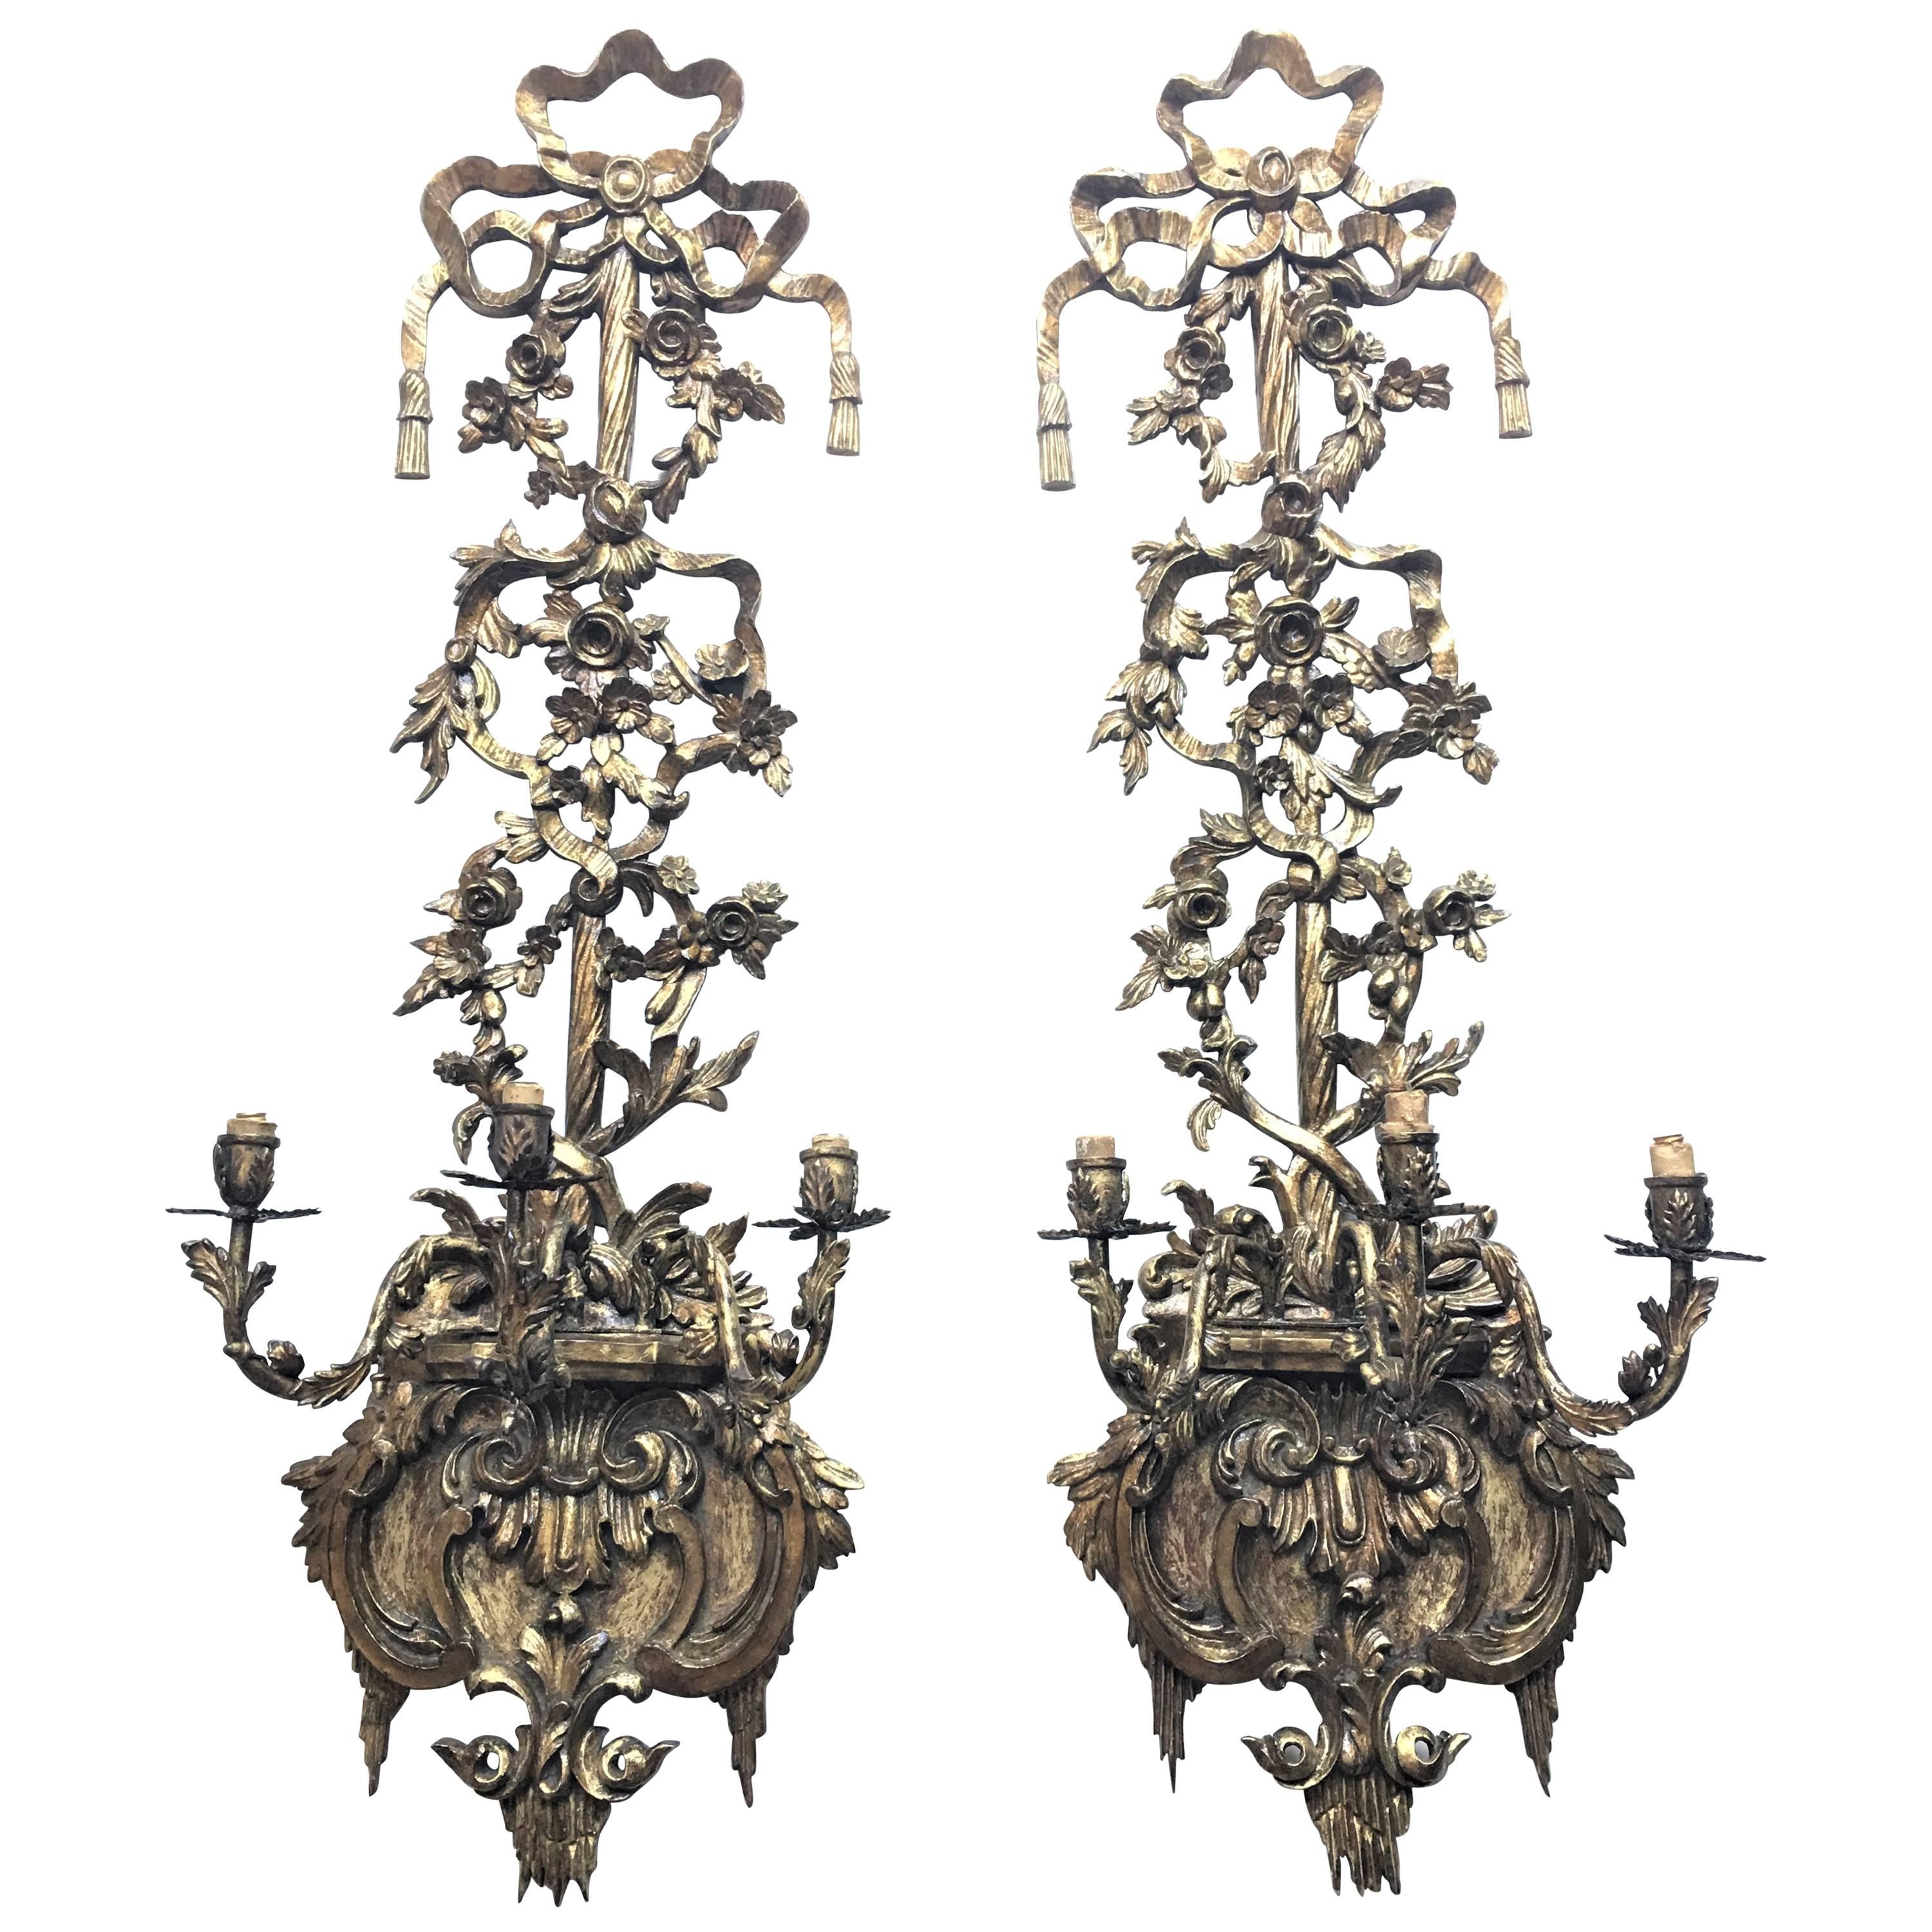 Pair of 19th Century Regency Carved Giltwood Sconces or Wall Appliques